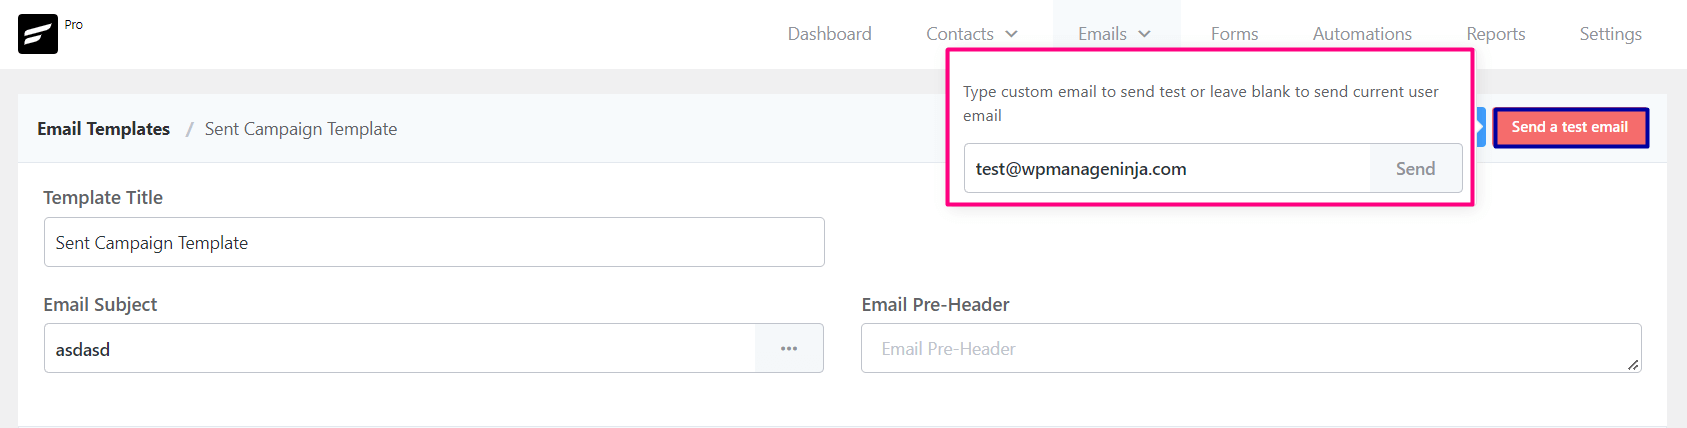 crm email template send test email